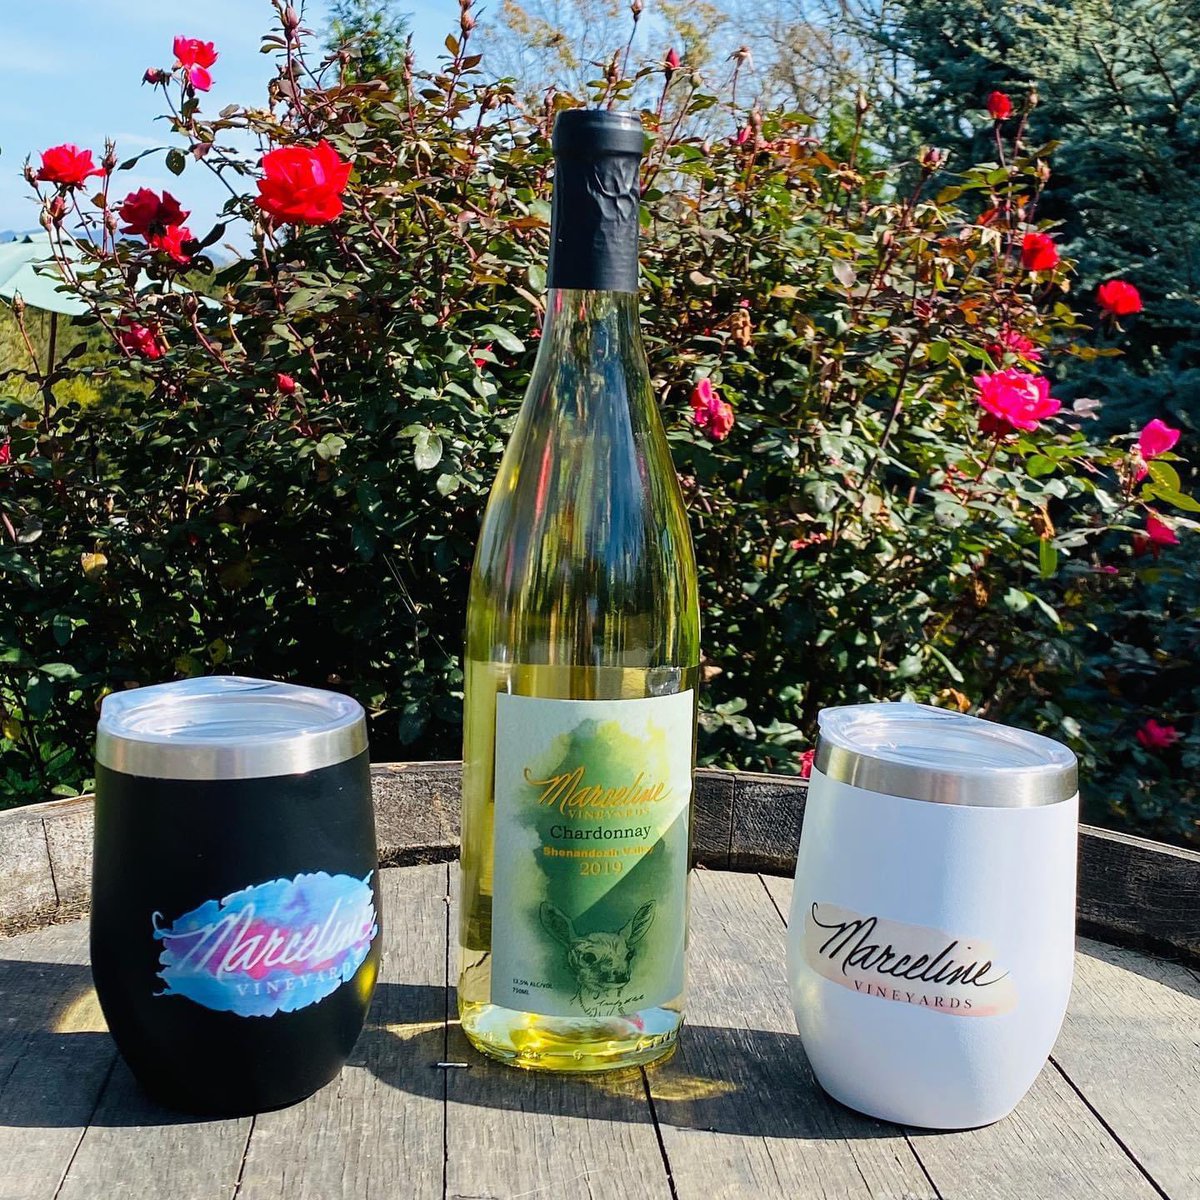 Is there a better way to enjoy a glass of our Chardonnay? Our new tumblers are available tomorrow! Keeps hot wine hot or cold wine cold #chardonnay #winetumblers #marcelinevineyards #vawinemonth